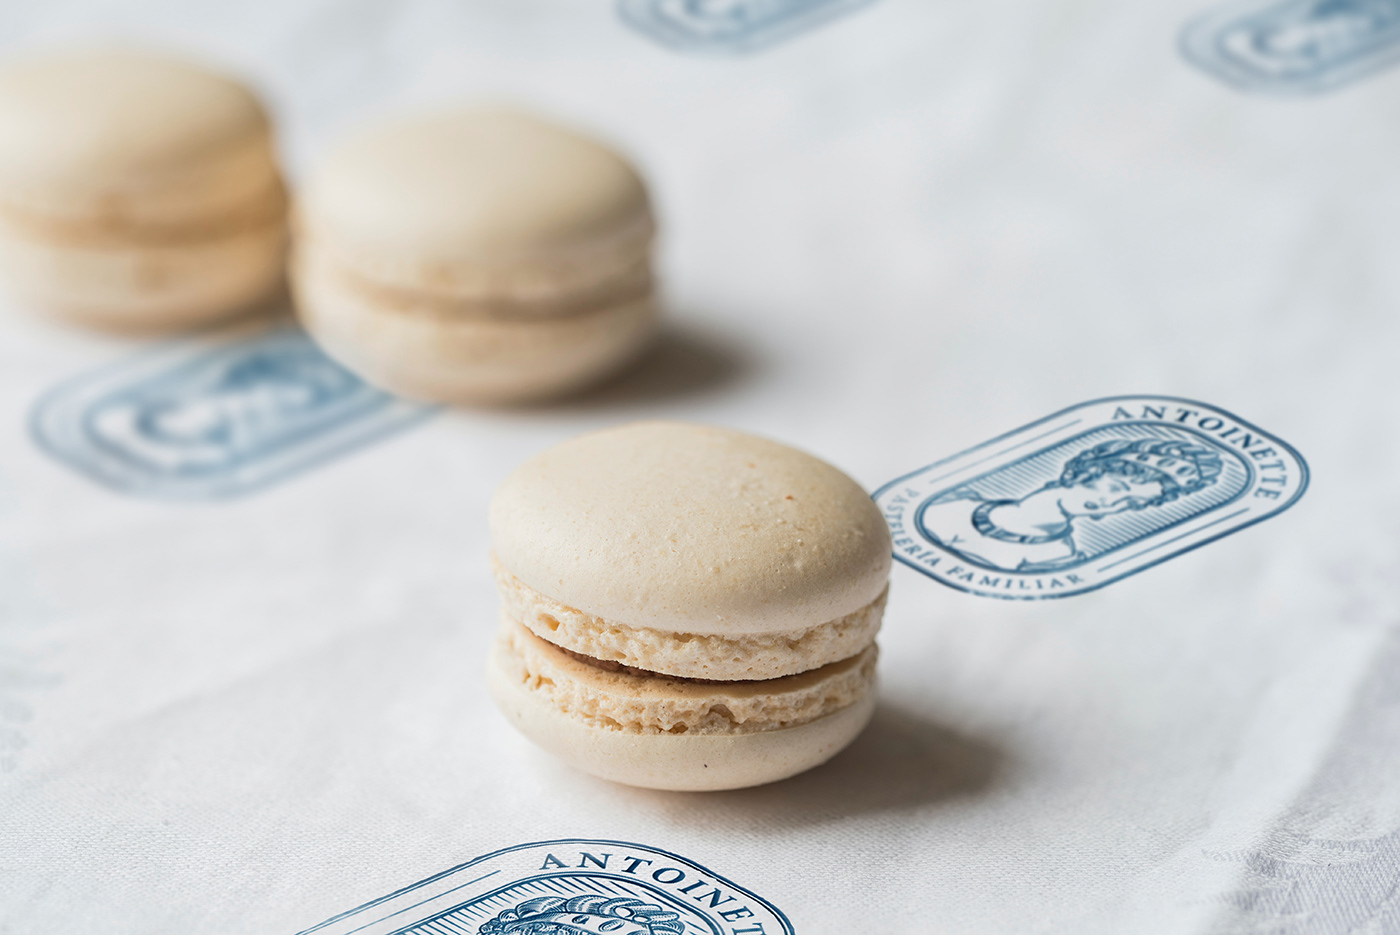 Brand design for Antoinette Cake Shop. Macaron on paper with brand stamps.